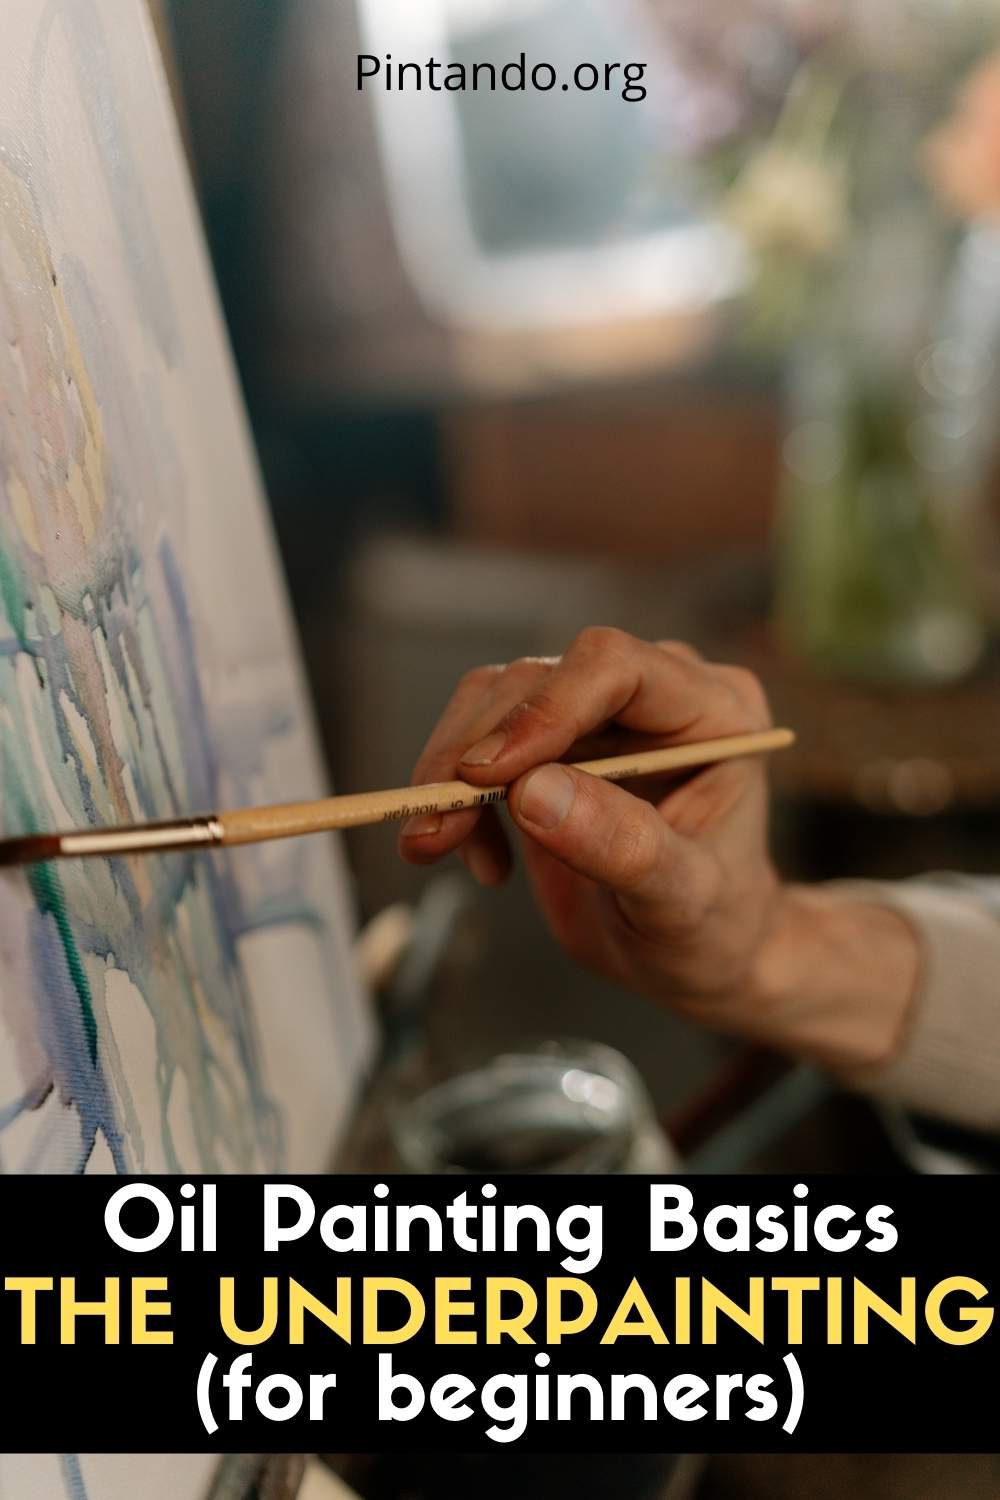 Oil Painting Basics The Underpainting (for beginners)